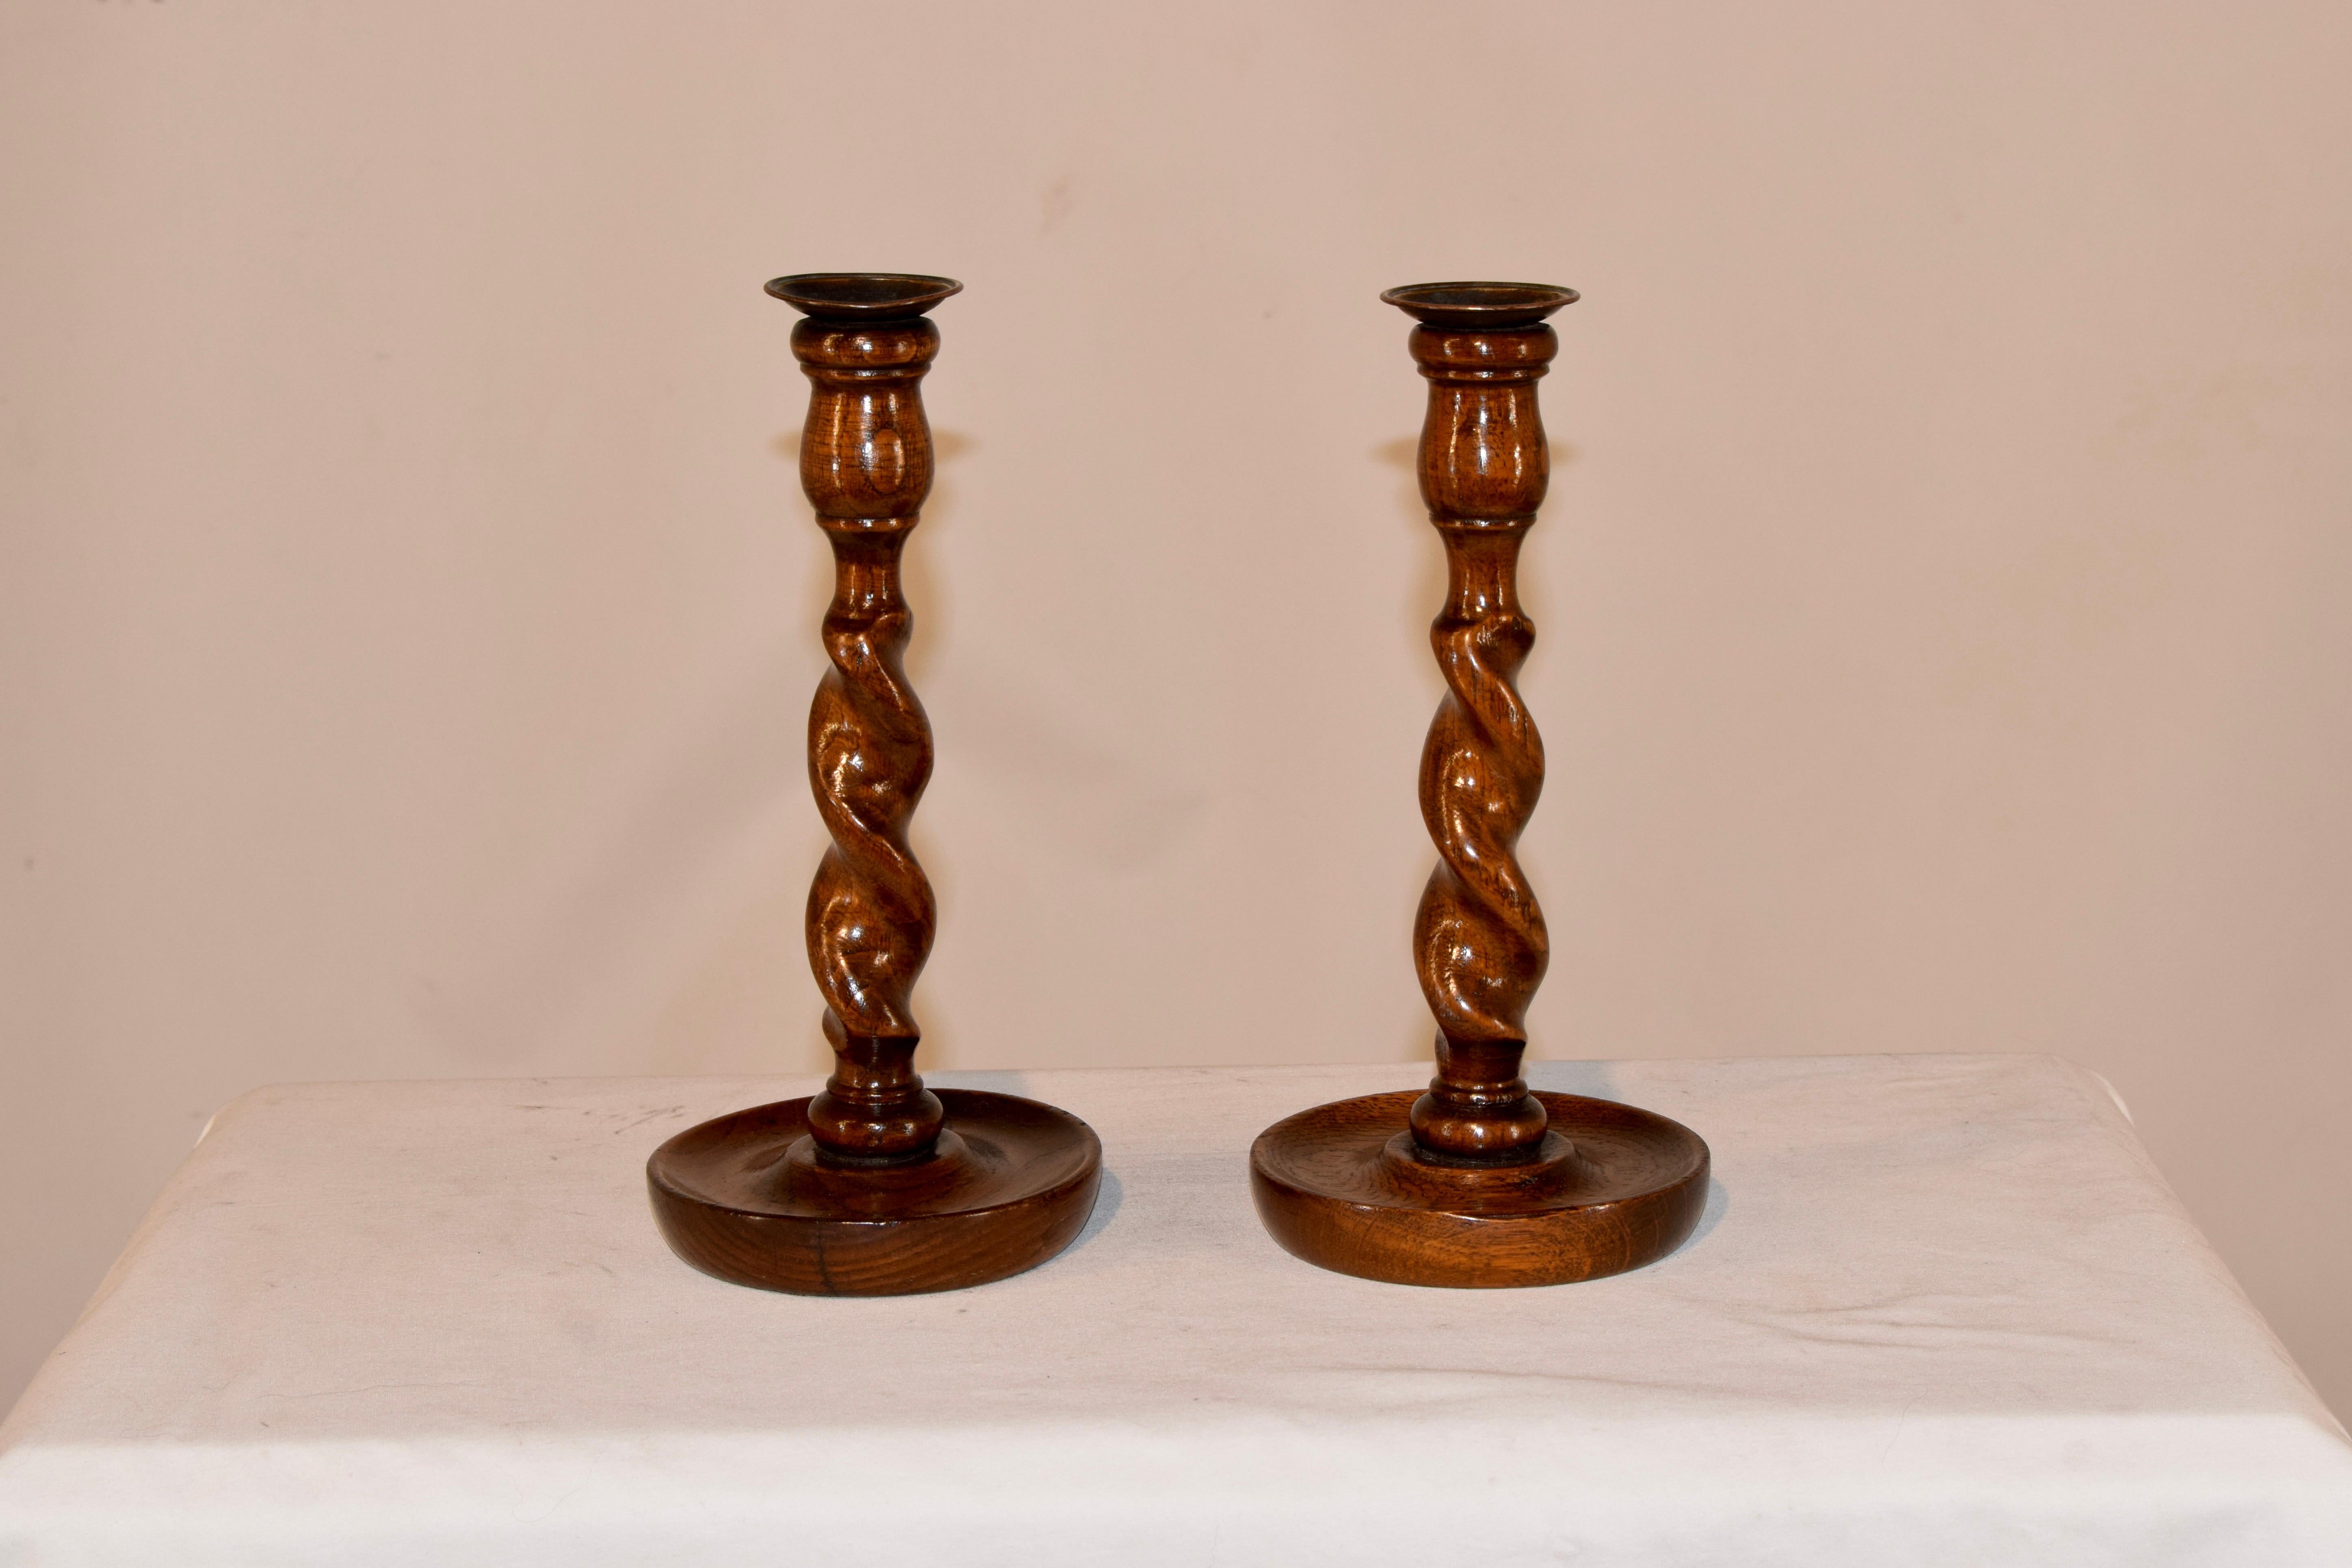 Pair of late 19th century English oak candlesticks with tulip turned candle cups, which retain the original brass candle cups over hand turned barley twist stems and supported on hand turned dish shaped bases.